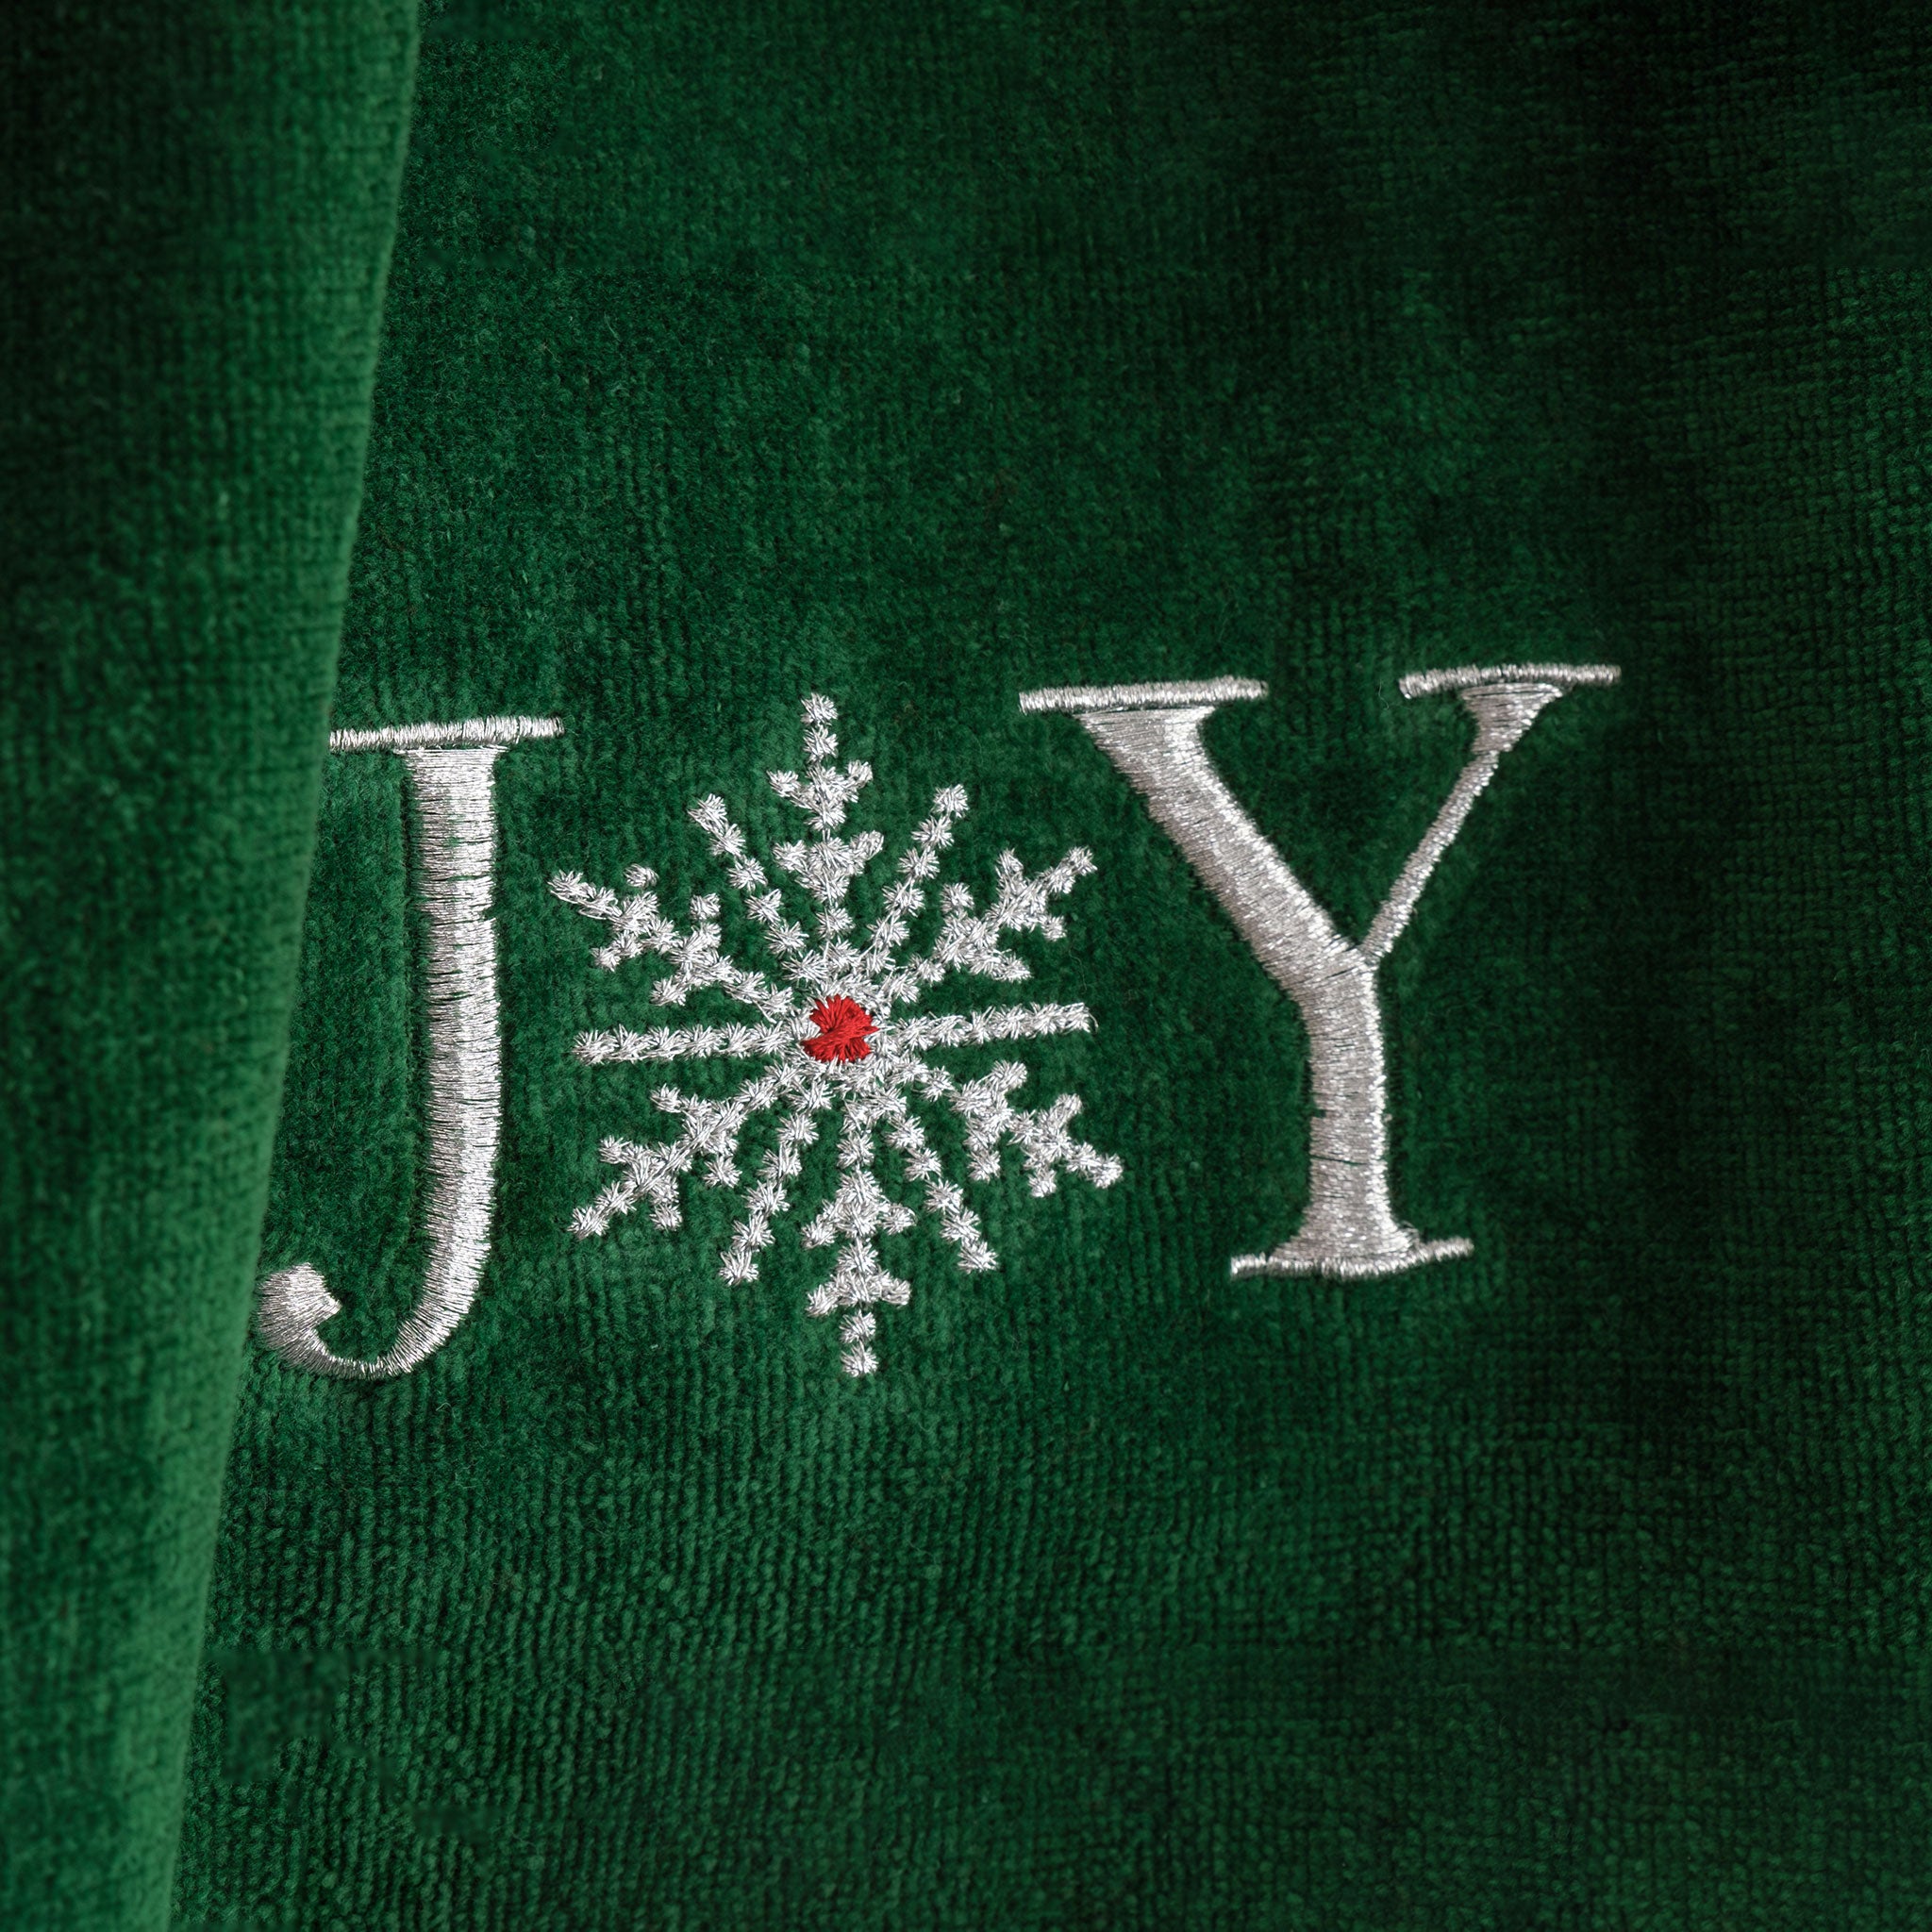 American Soft Linen - Christmas Towels 2  Packed Embroidered Towels for Decor Xmas - 60 Set Case Pack - Joy-Believe - 5